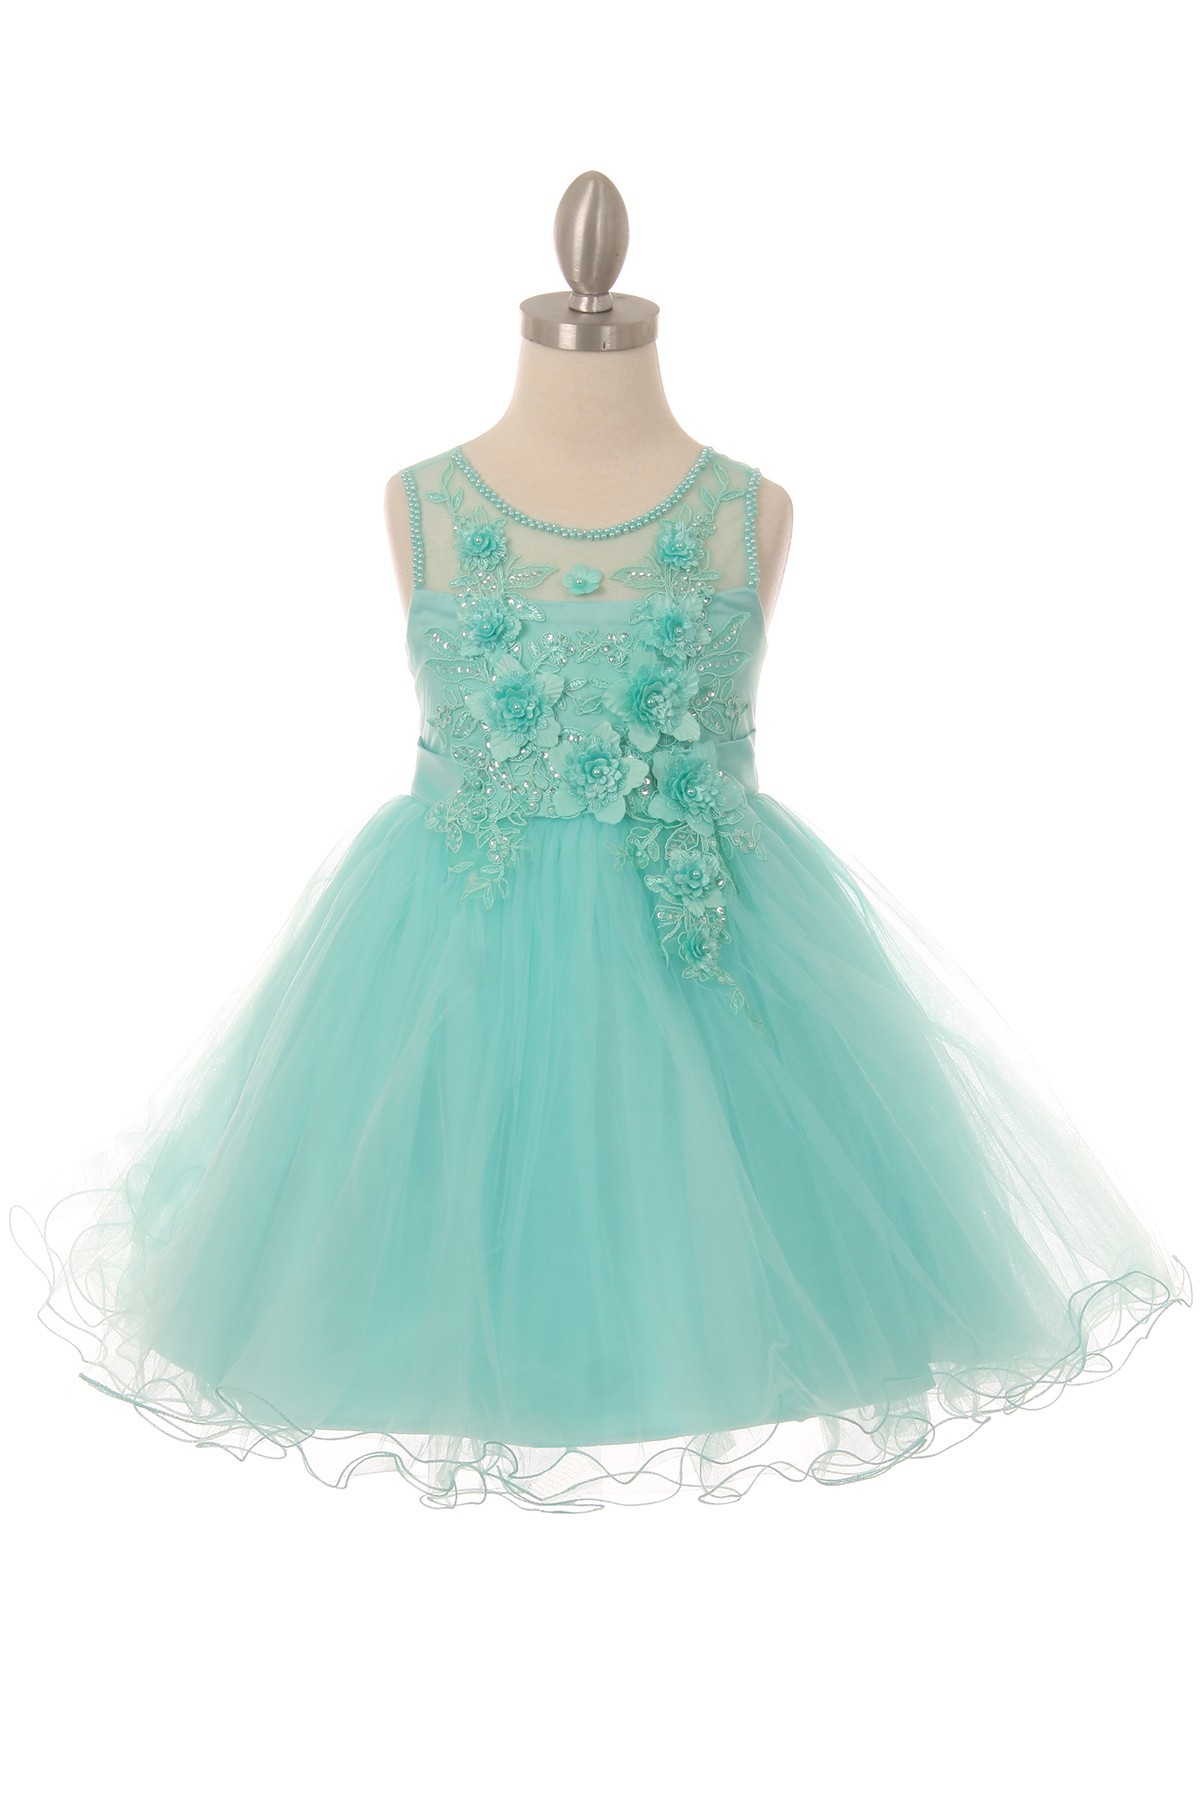 Girls short floral tulle lace dress with illusion neckline, and bow back. 